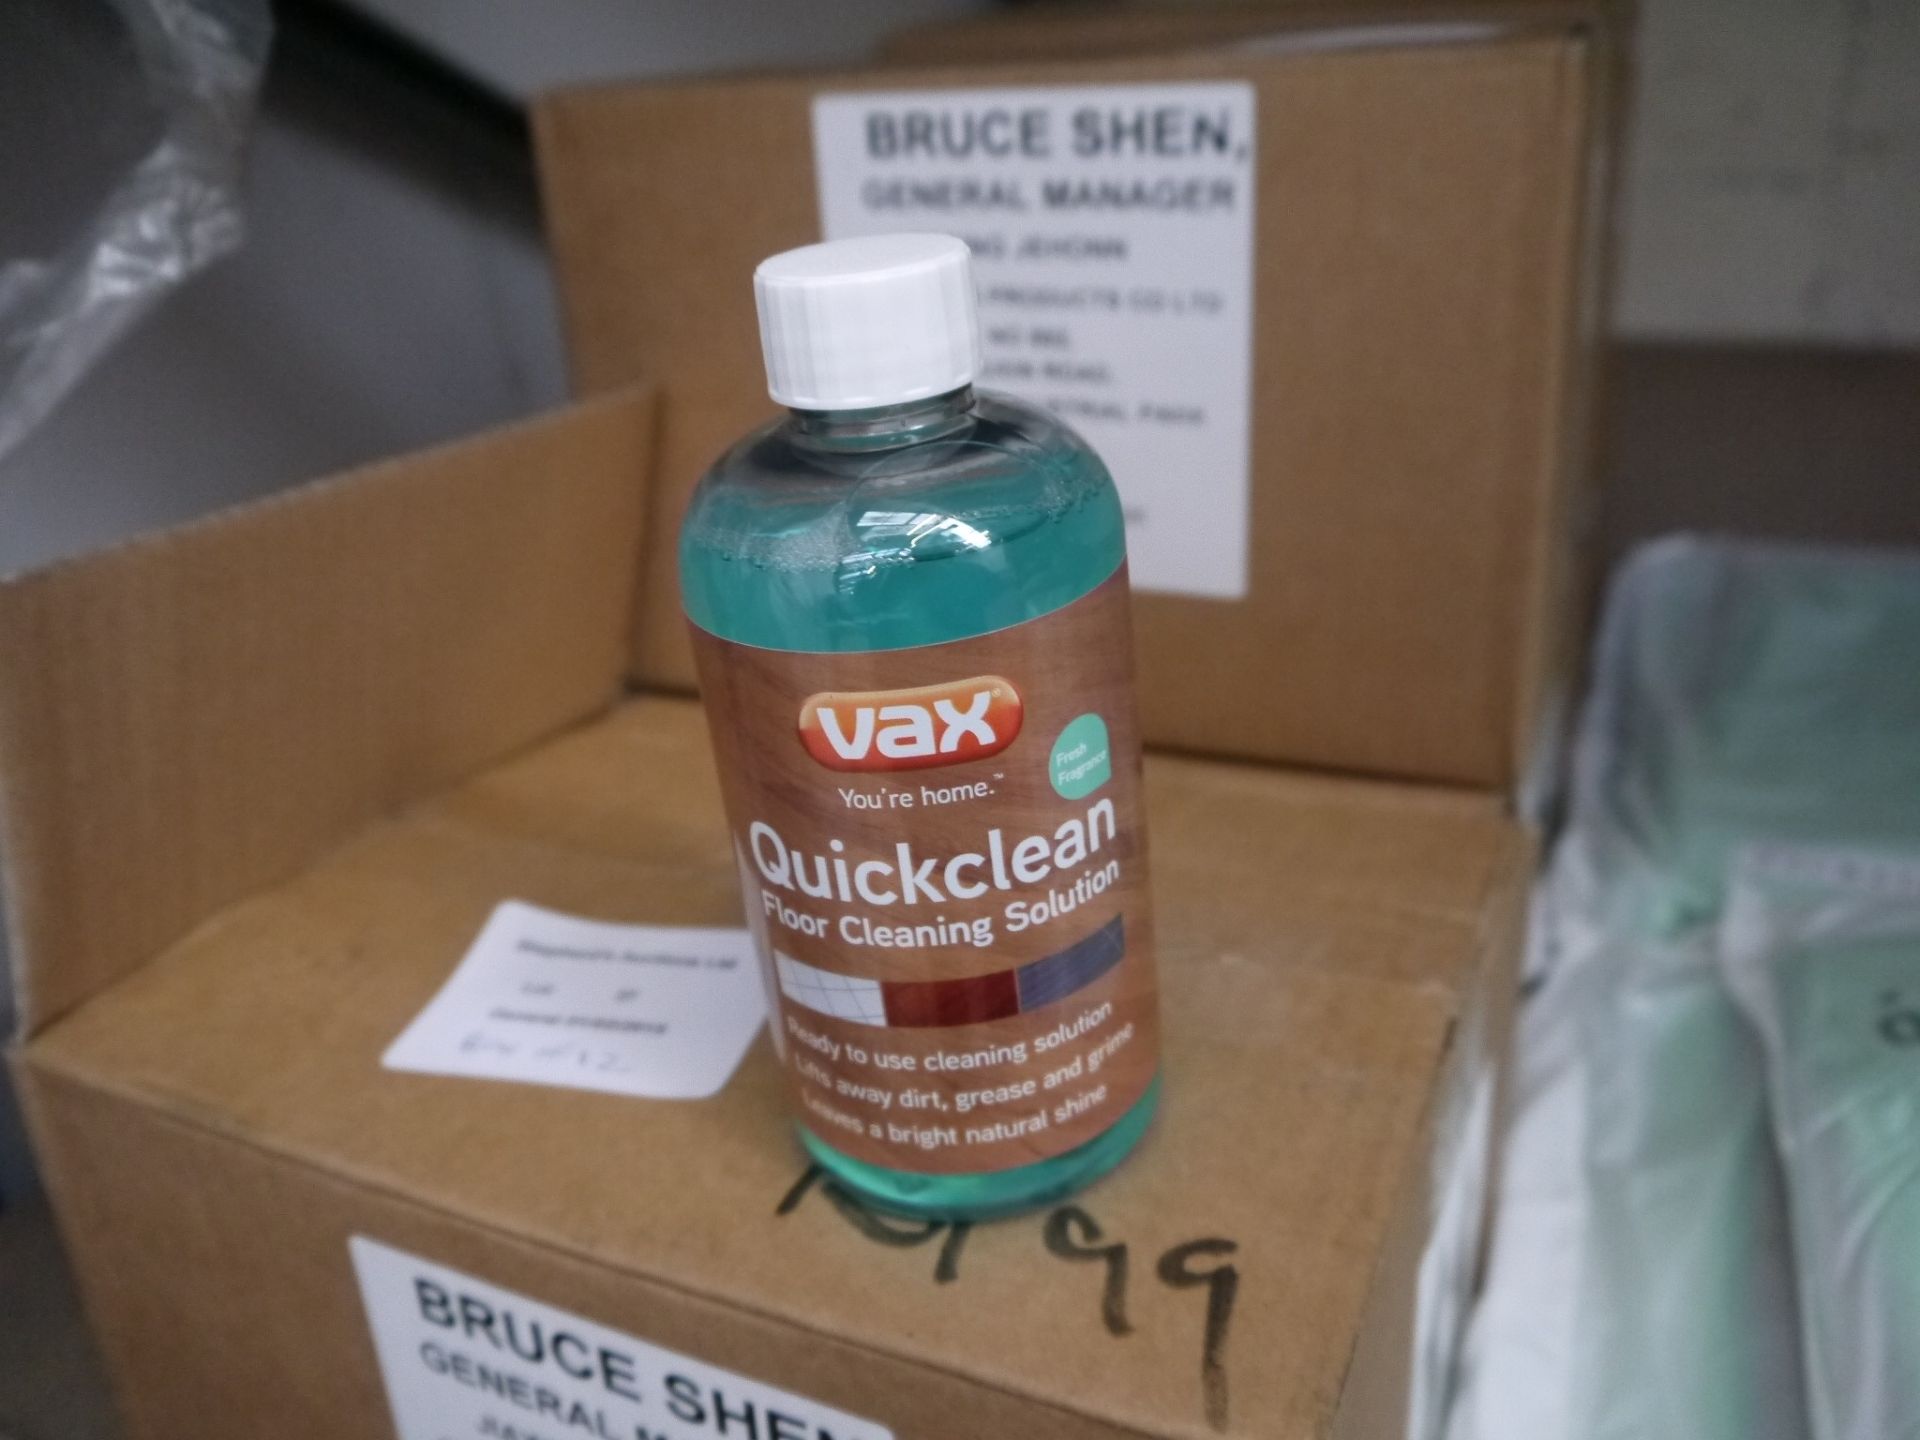 Box of 12, 250 ml bottles of VAC Quickclean, the floor cleaning solution.